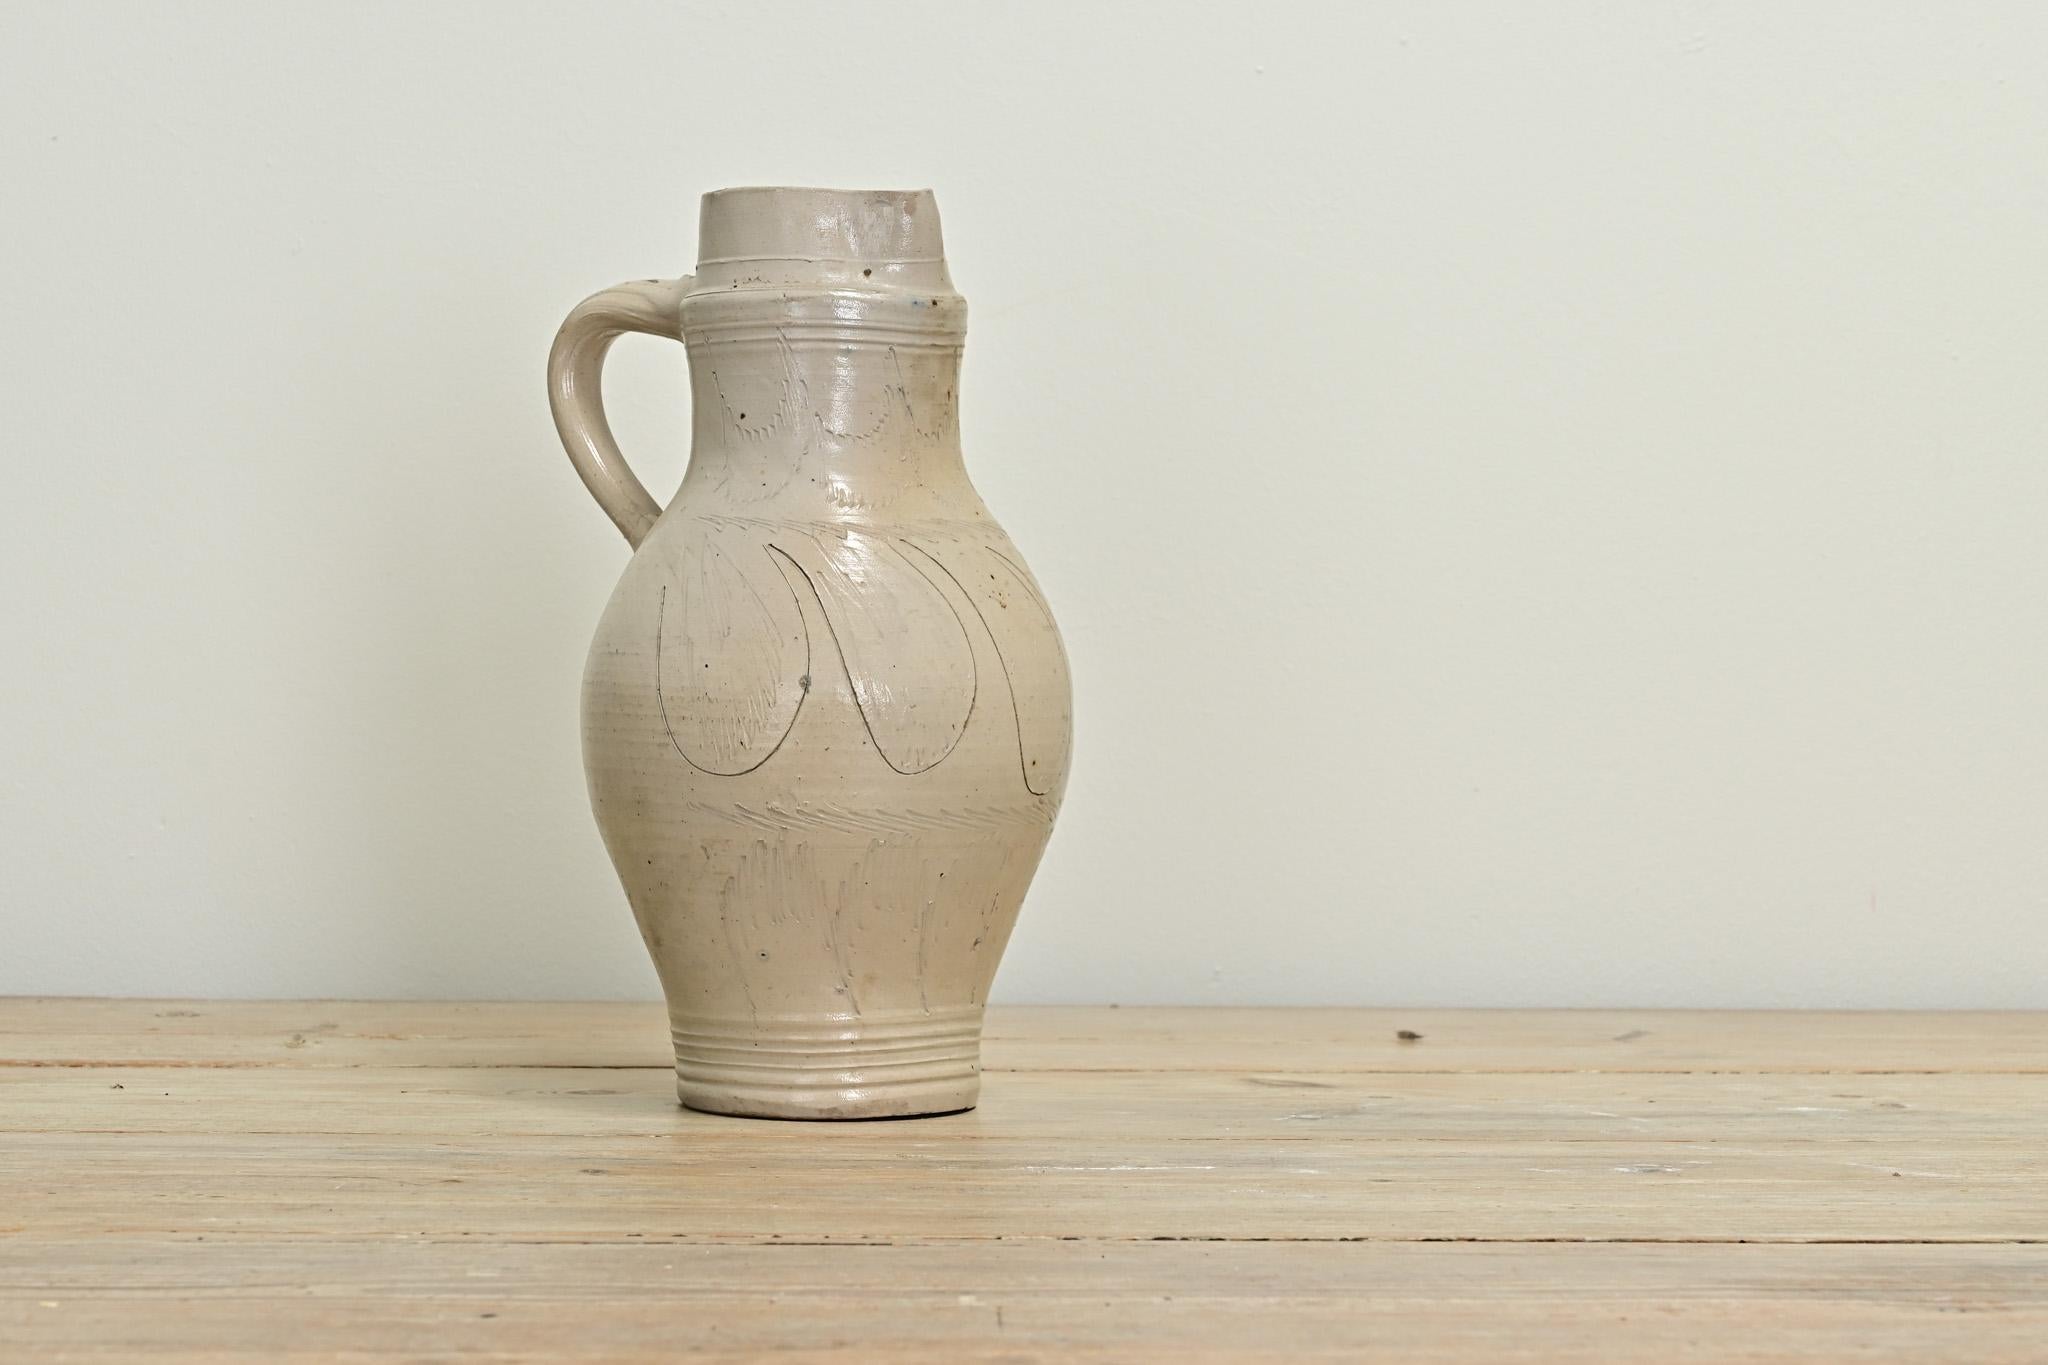 This French earthenware jar adds character to any interior with its unique texture, etched pattern, color, and patina. The jar has a handle and spout perfect for using or for decoration. Be sure to view the detailed images to see the current